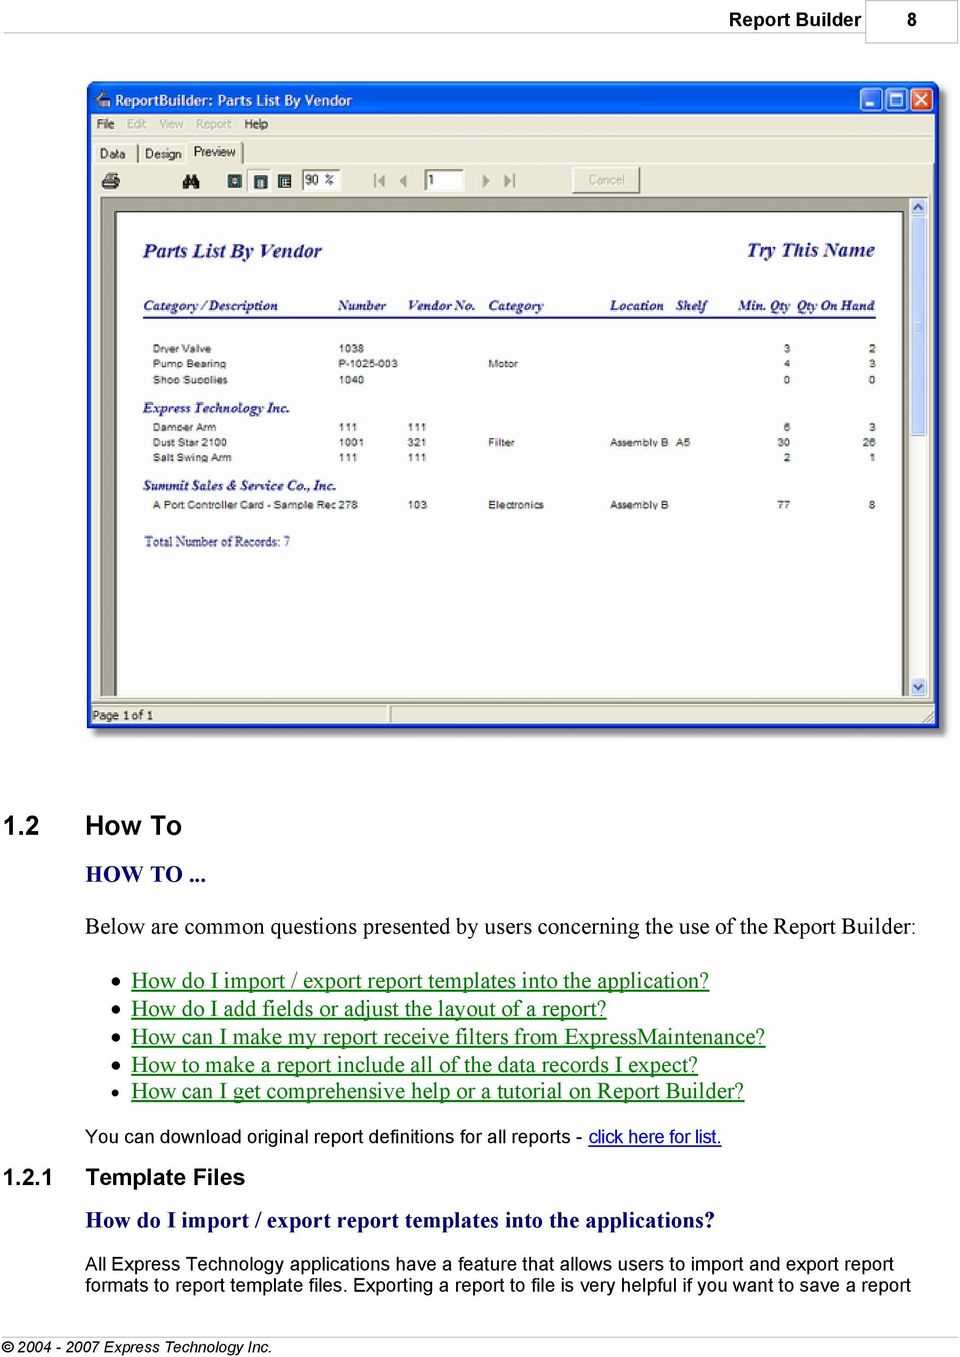 Report Builder User's Guide – Pdf Free Download For Report Builder Templates